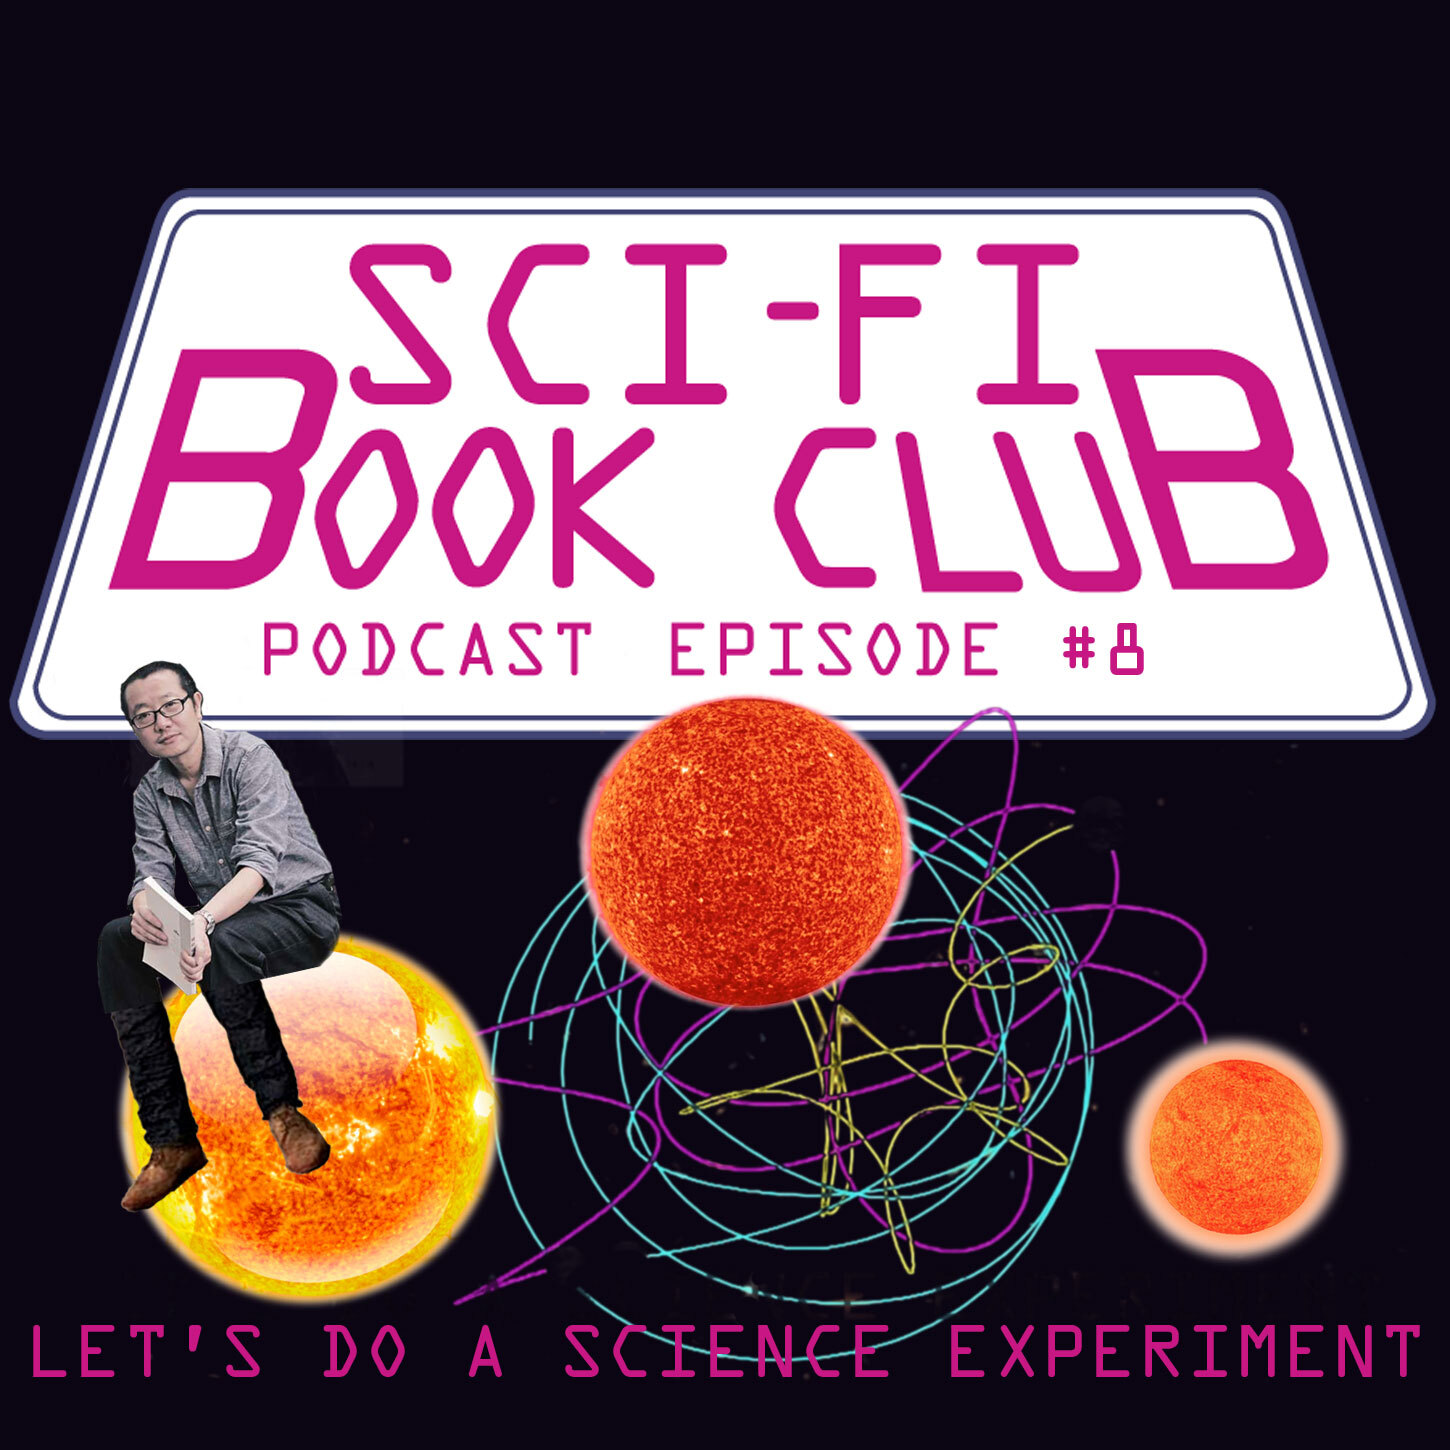 Sci-Fi Book Club Podcast #8: Let's Do A Science Experiment